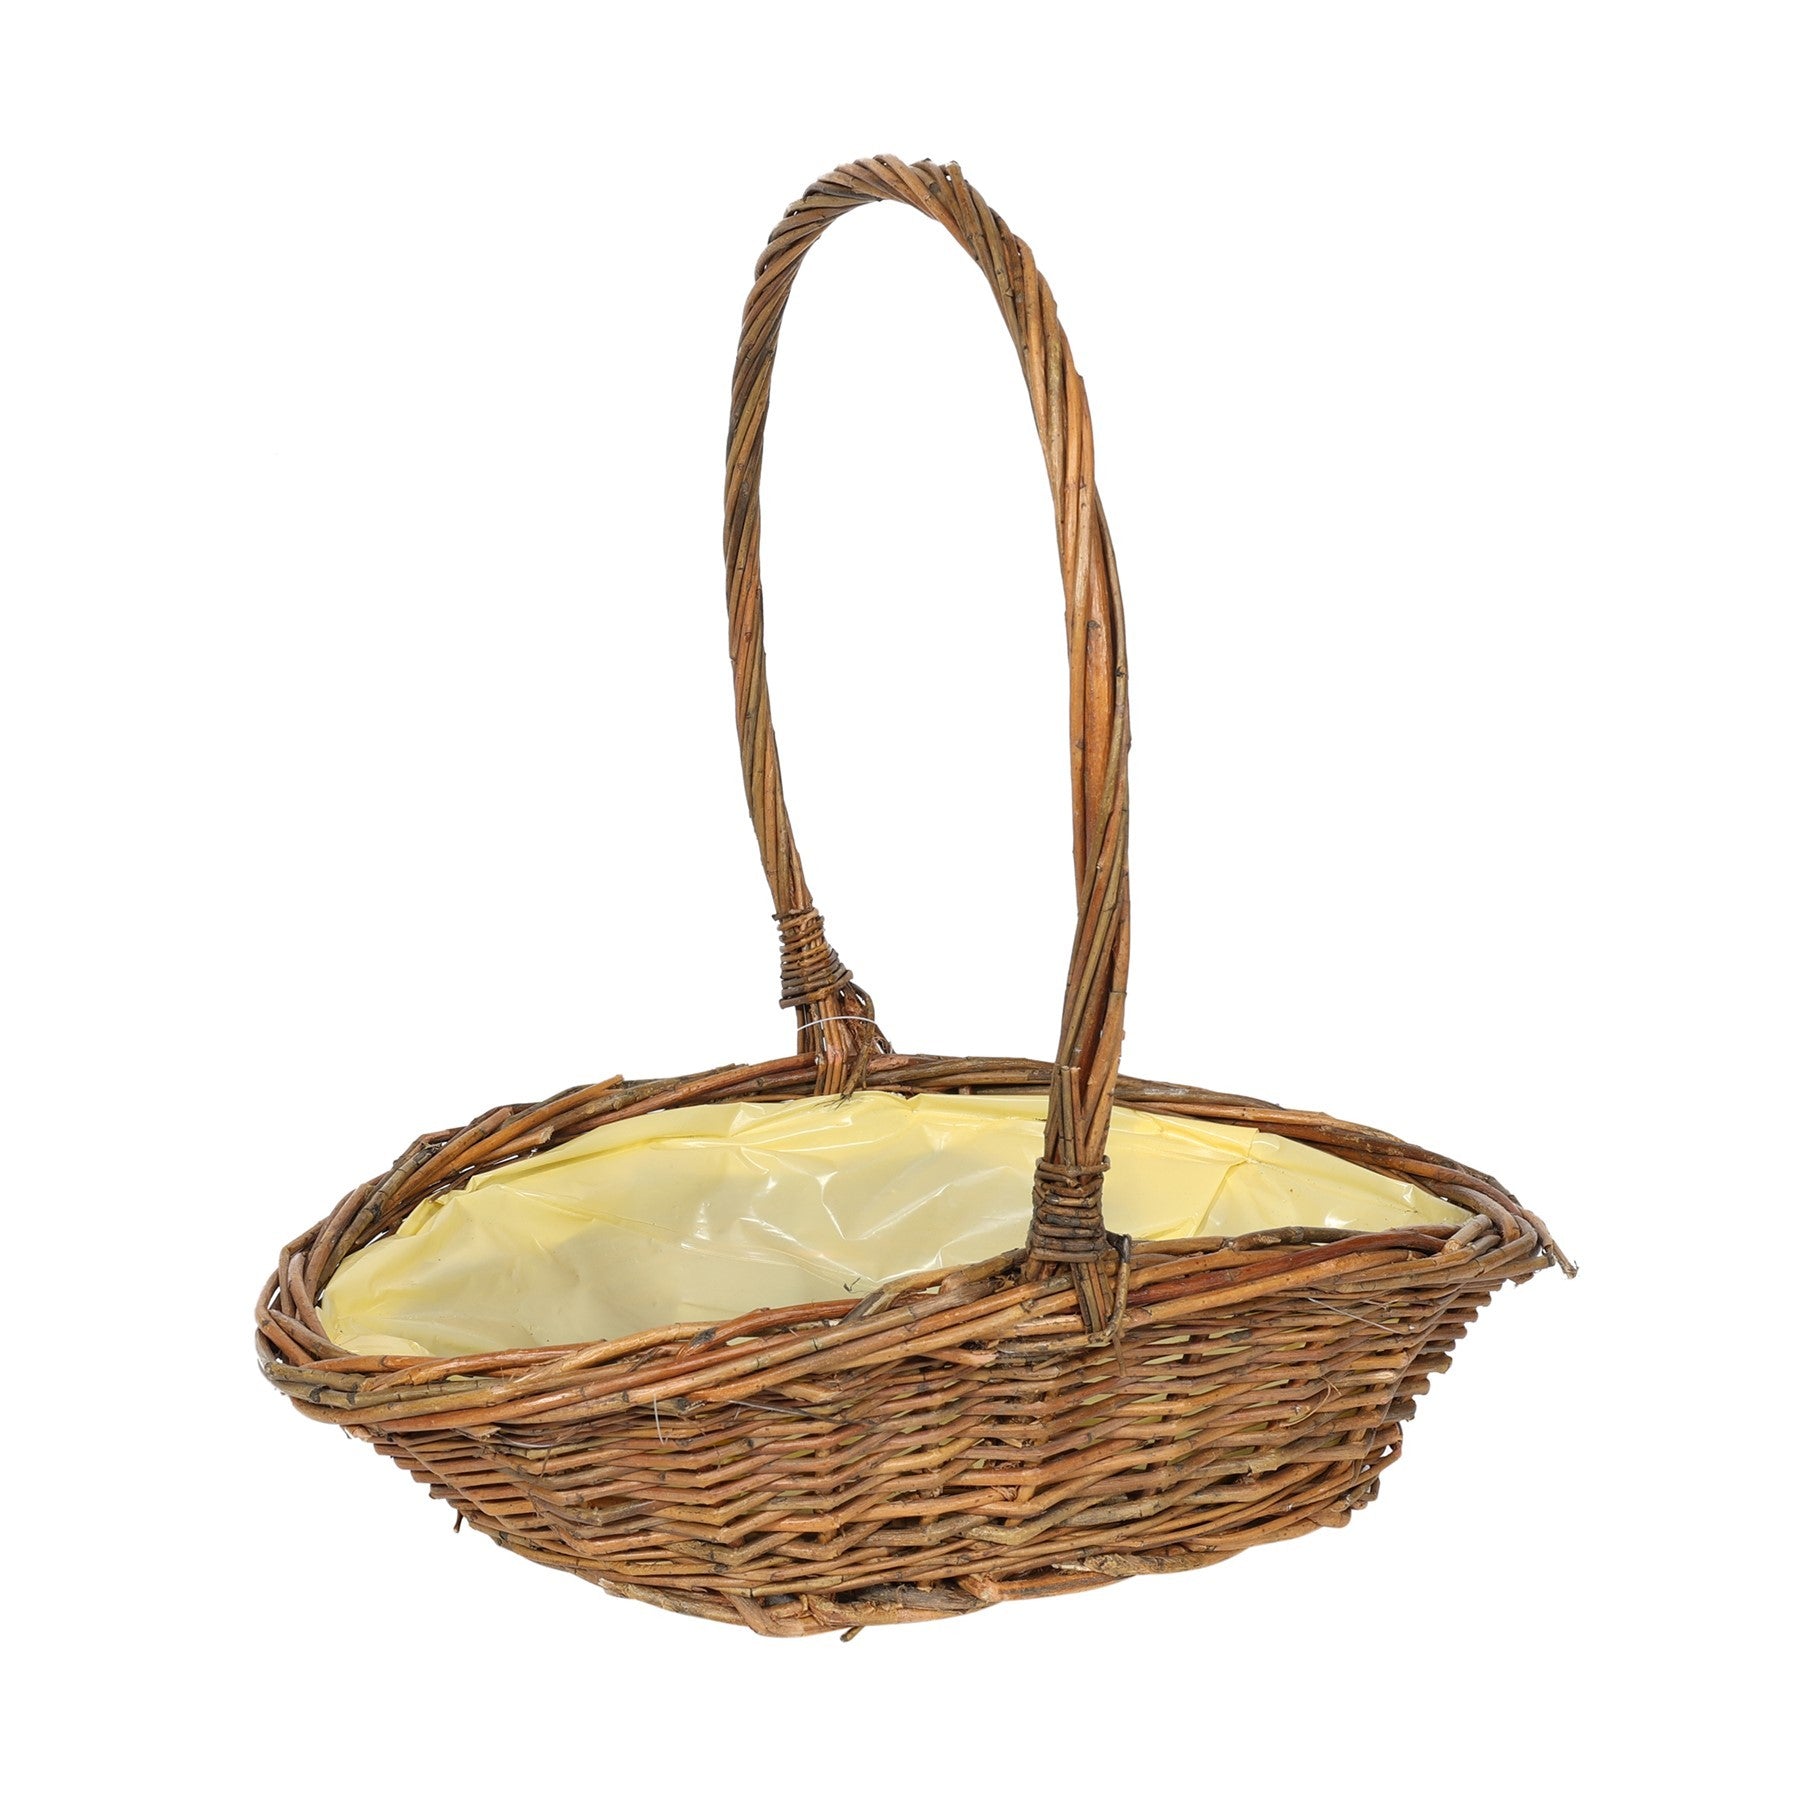 View Large Single Country Basket information